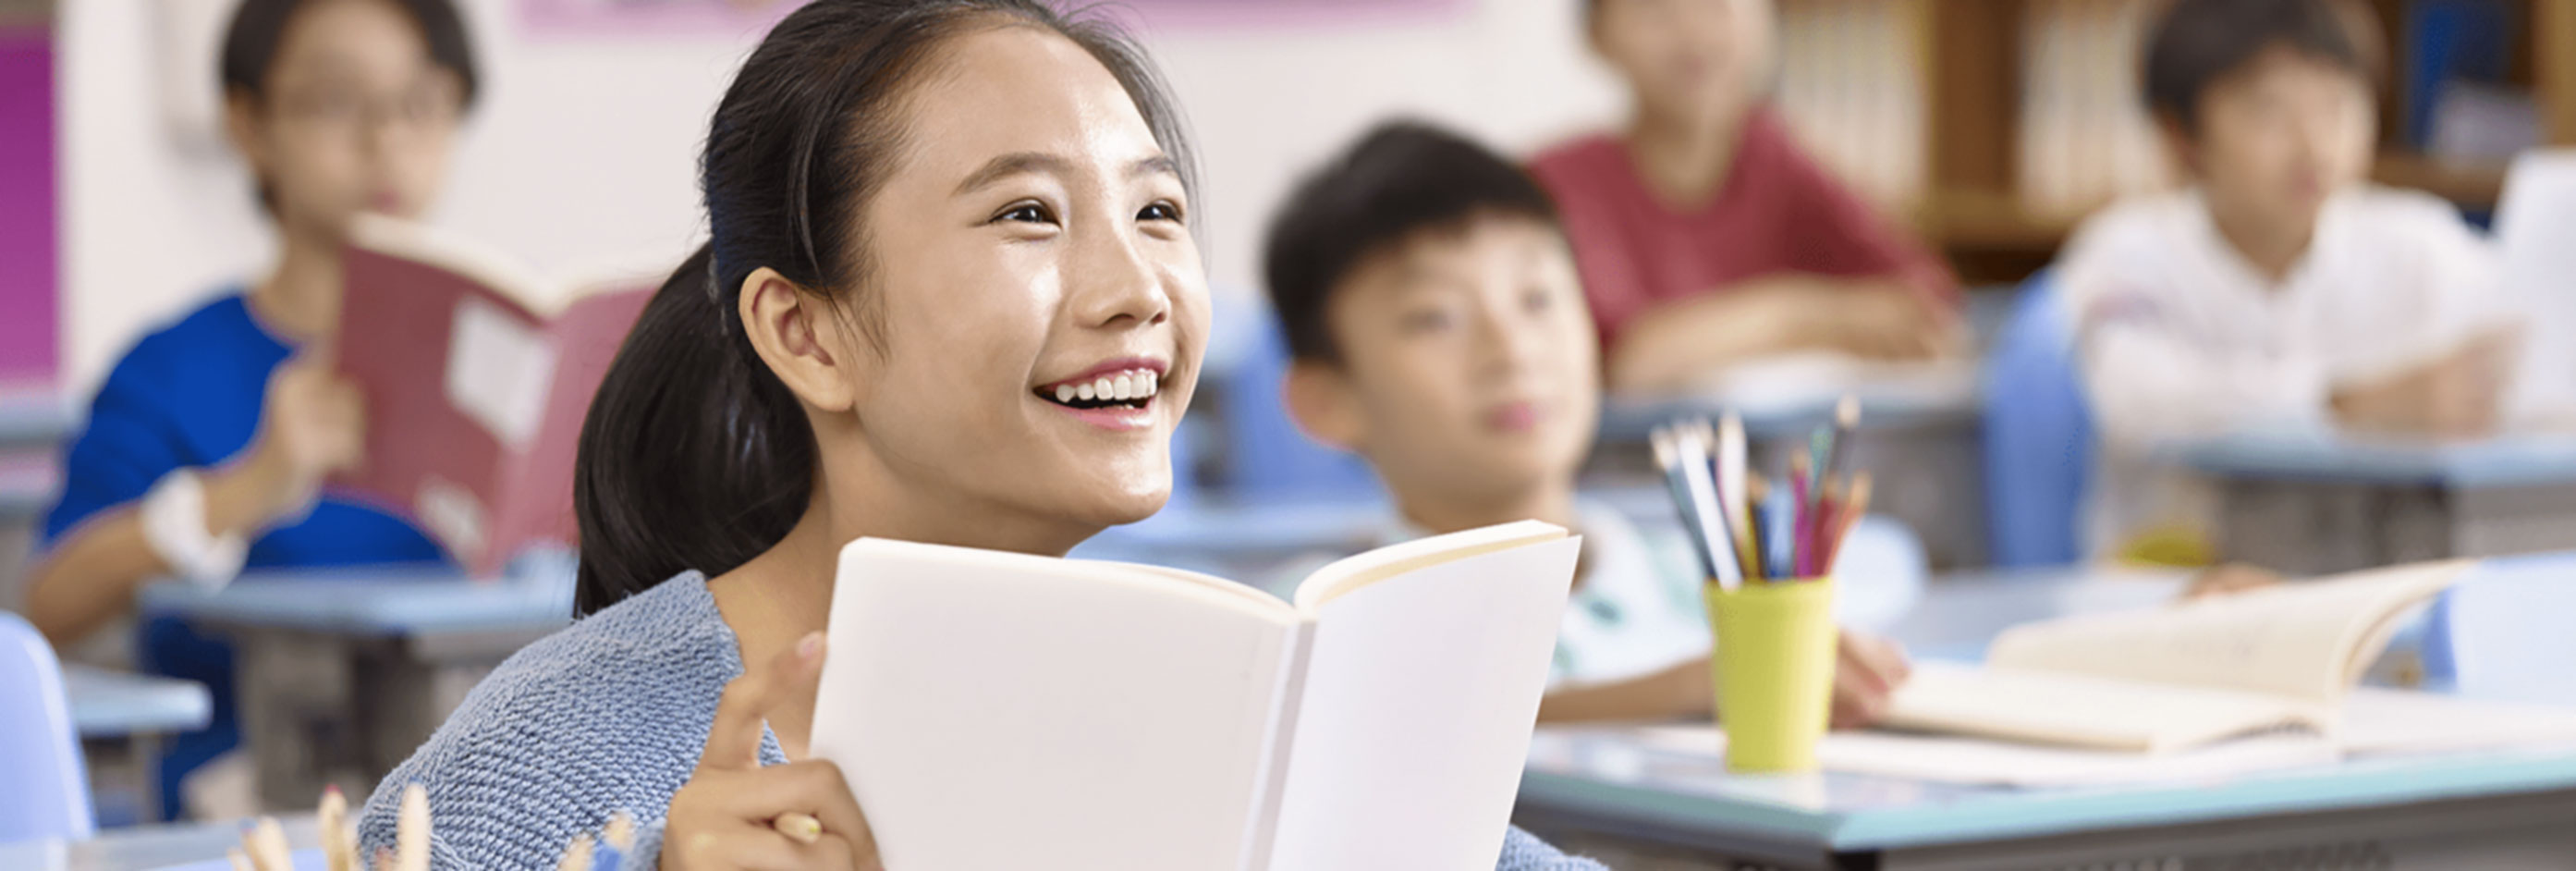 Student smiling while holding a book.